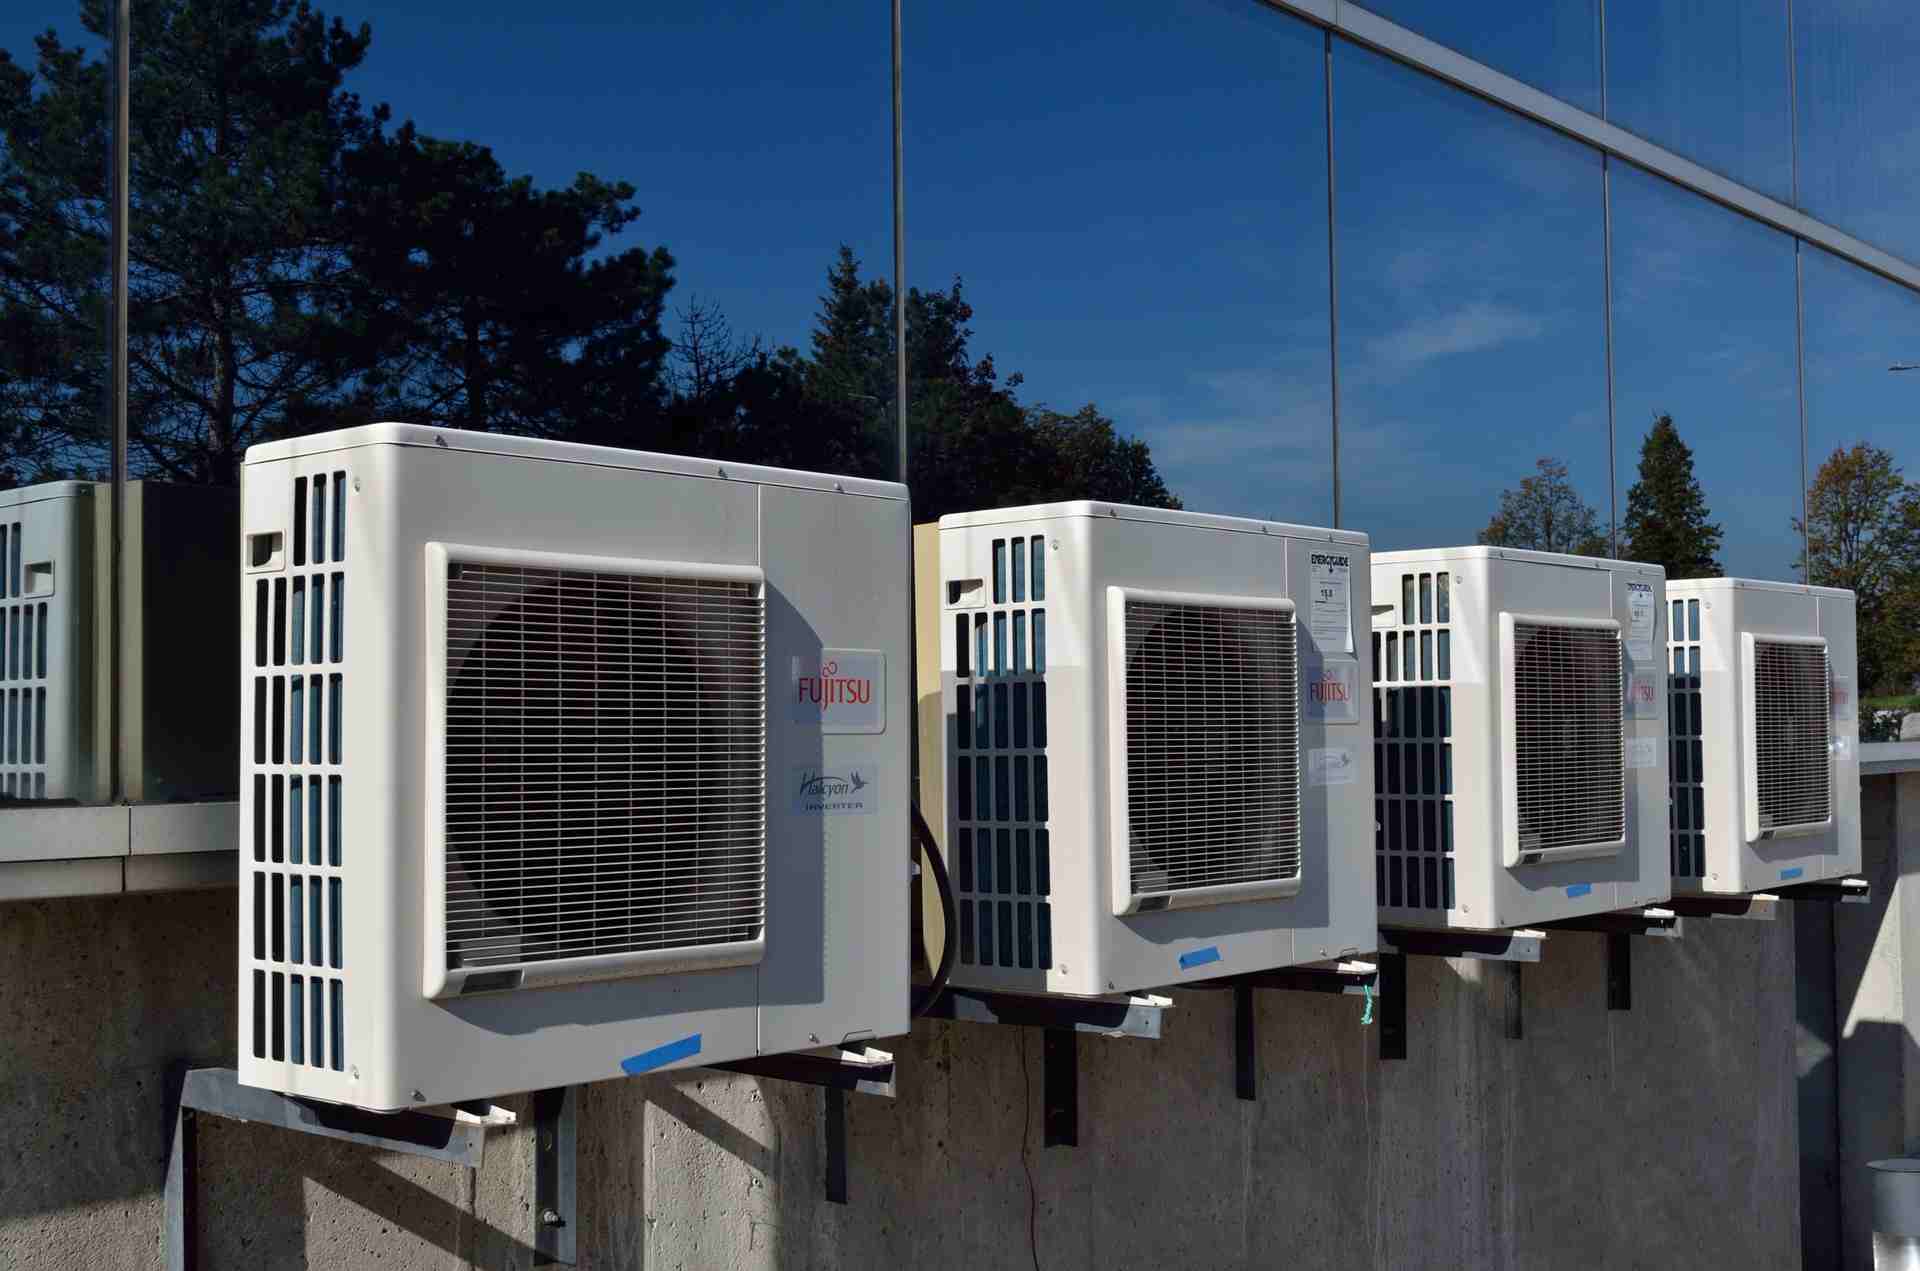 Here are 4 steps to prepare your HVAC and guarantee a cool summer:  1.	Clean in and around both your indoor and outdoor units Depending on your region, you may not have seen the ground since November (or maybe even October). Maybe you were good last fall and picked up the sticks and leaves, but that didn’t quite spare your HVAC from the elements. Clean any twig, leaves, acorns, or any other debris that might’ve found it’s way in the wrong places. Also be sure to clear any vegetation growth near the outdoor unit to ensure clear airflow.     2.	Replace the air filter Dust, allergens, pollution, and pollen are just a few of the impurities your air filter protects you from. Over time, your filter become less and less affective as it accumulates the impurities. You should replace your air filter every three months. Keep it clean and your air will be clean. If it is time to replace the filter this month, there’s no reason to procrastinate.   3.	Check your air conditioner for maintenance  I’m sure it’s been a while since you’ve turned on the cold air. For most people, cold air has been the enemy for months. Now it is time to reconcile your disdain and appreciate all of the good things your air conditioner will do for you throughout the hot summer. Turn your air on for a few minutes to make sure everything is in good shape. If you don’t notice a change in the temperature, you may need to arrange for some repairs.  4.	Seal your ducts and any drafty areas There are few things worse than the precious cool air seeping out into the heat of the outdoors. There are also few things more wasteful than leaky ducts. Make sure you seal your ducts, so that the cool air travels where you want it and nowhere else. Also check the insulation around your doors and windows to keep the cool air inside. No one wants to spend money to cool the temperature outdoors. It just doesn’t work. Save the energy and your money.